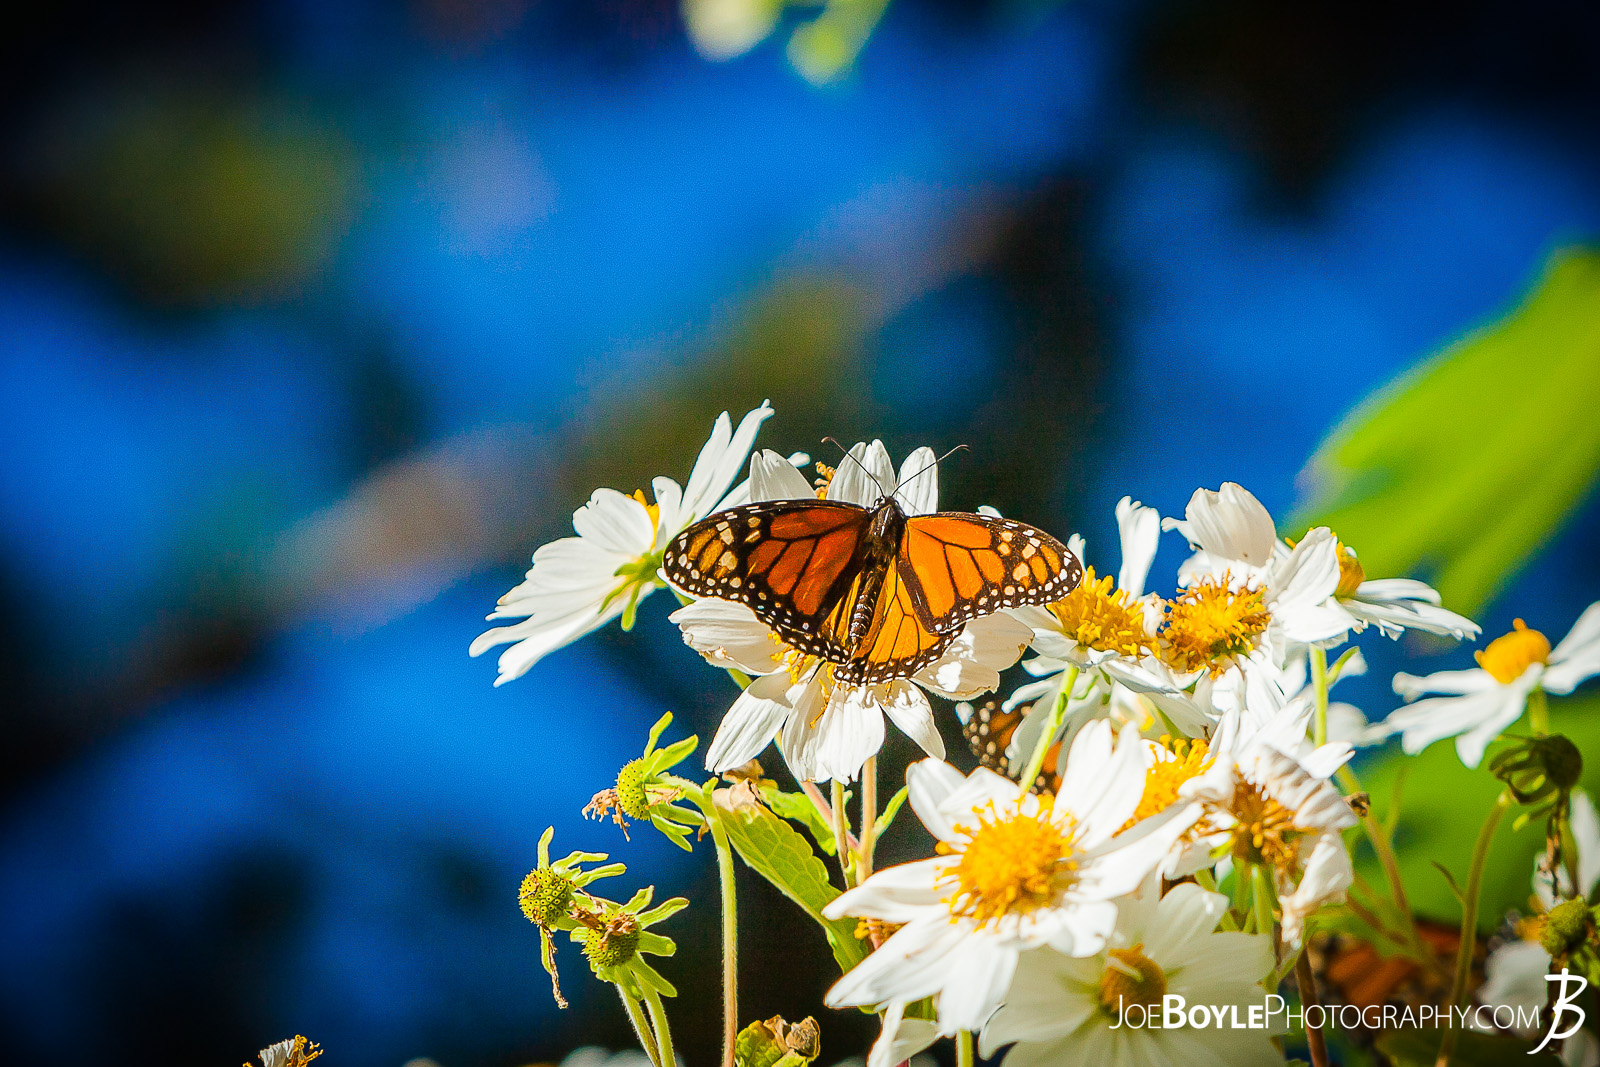  When I was traveling to Monterey, California I discovered the "Monarch Grove Butterfly Sanctuary" in Pacific Grove. This is a "resting place" in the eucalyptus grove for the butterflies as they make their journey towards warmer climates! 